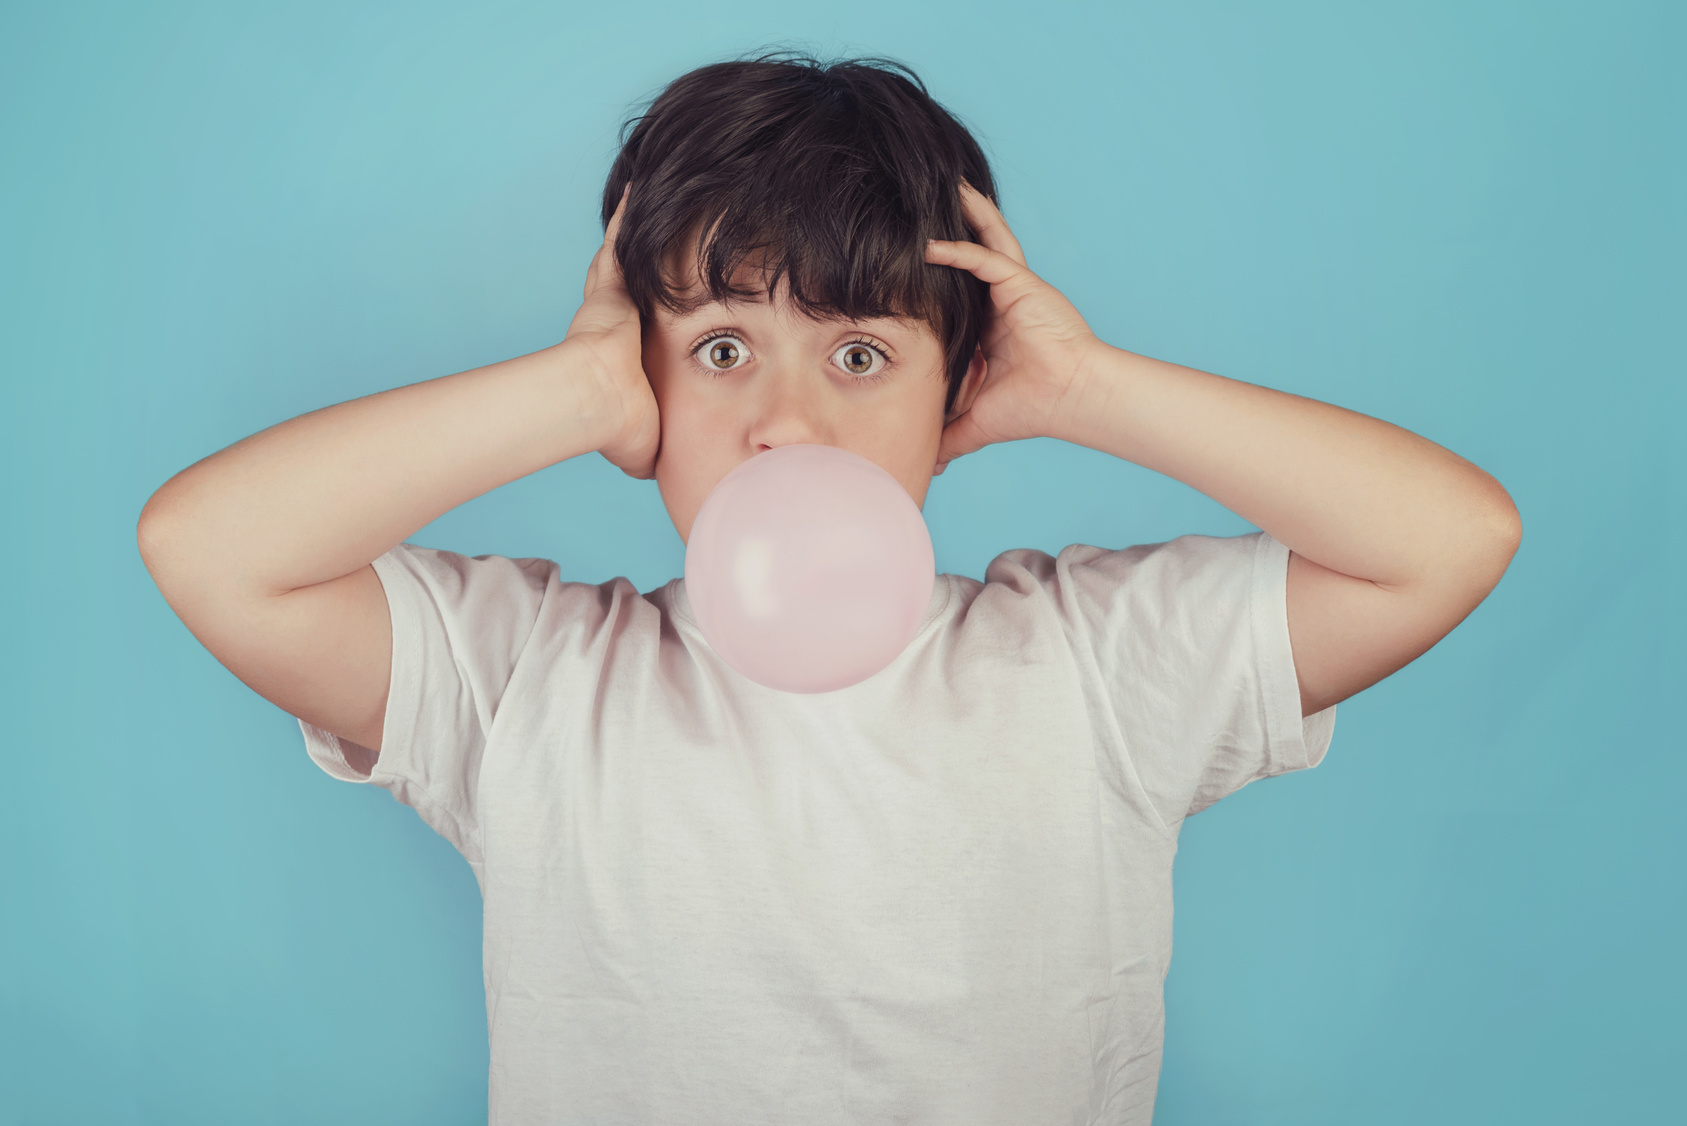 Does Sugar-Free Gum Fight Cavities?